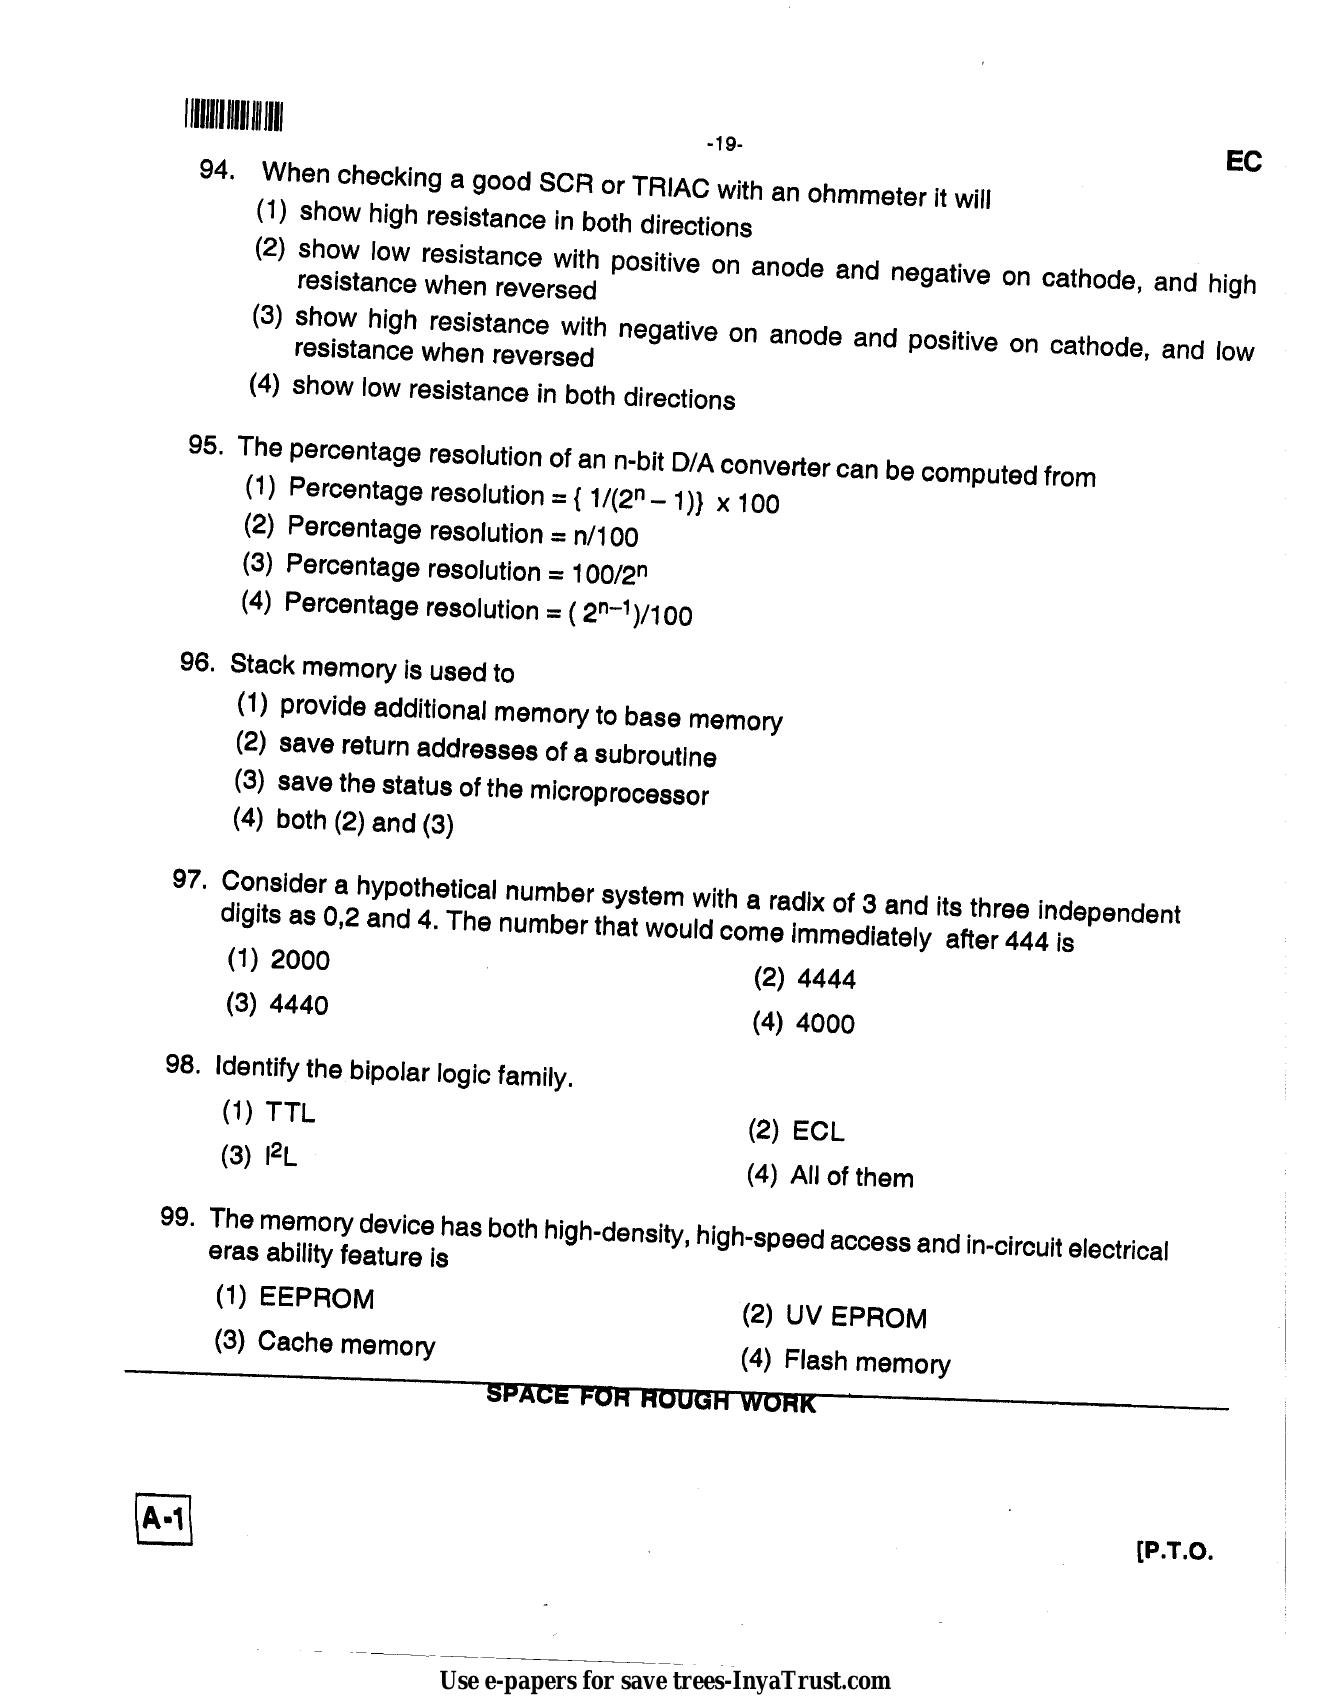 Karnataka Diploma CET- 2013 Electronics and Communication Engineering Question Paper - Page 19